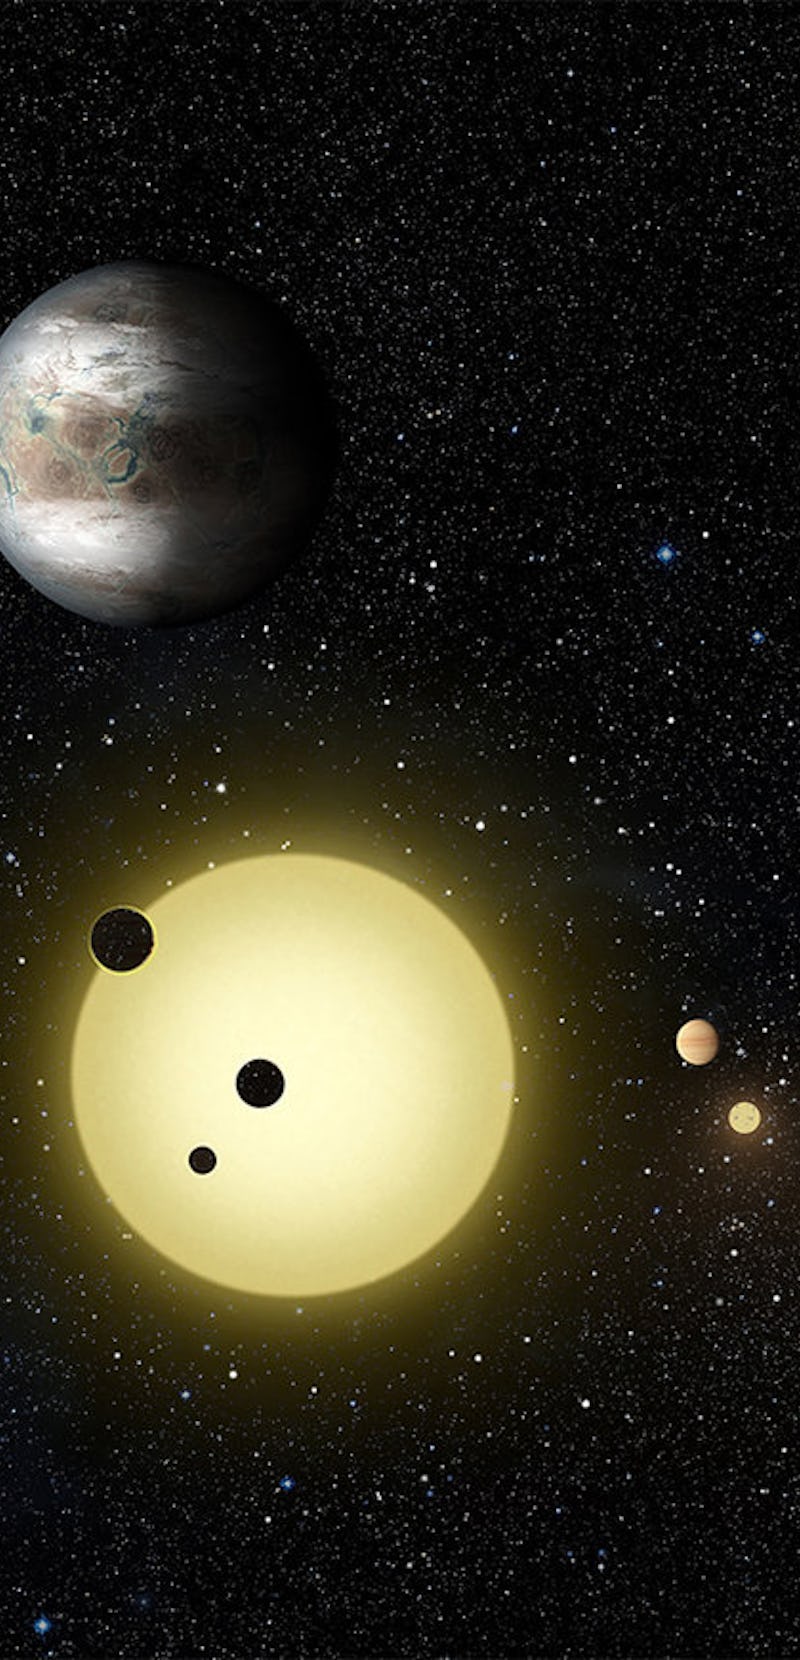 An illustration of exoplanets in the universe.